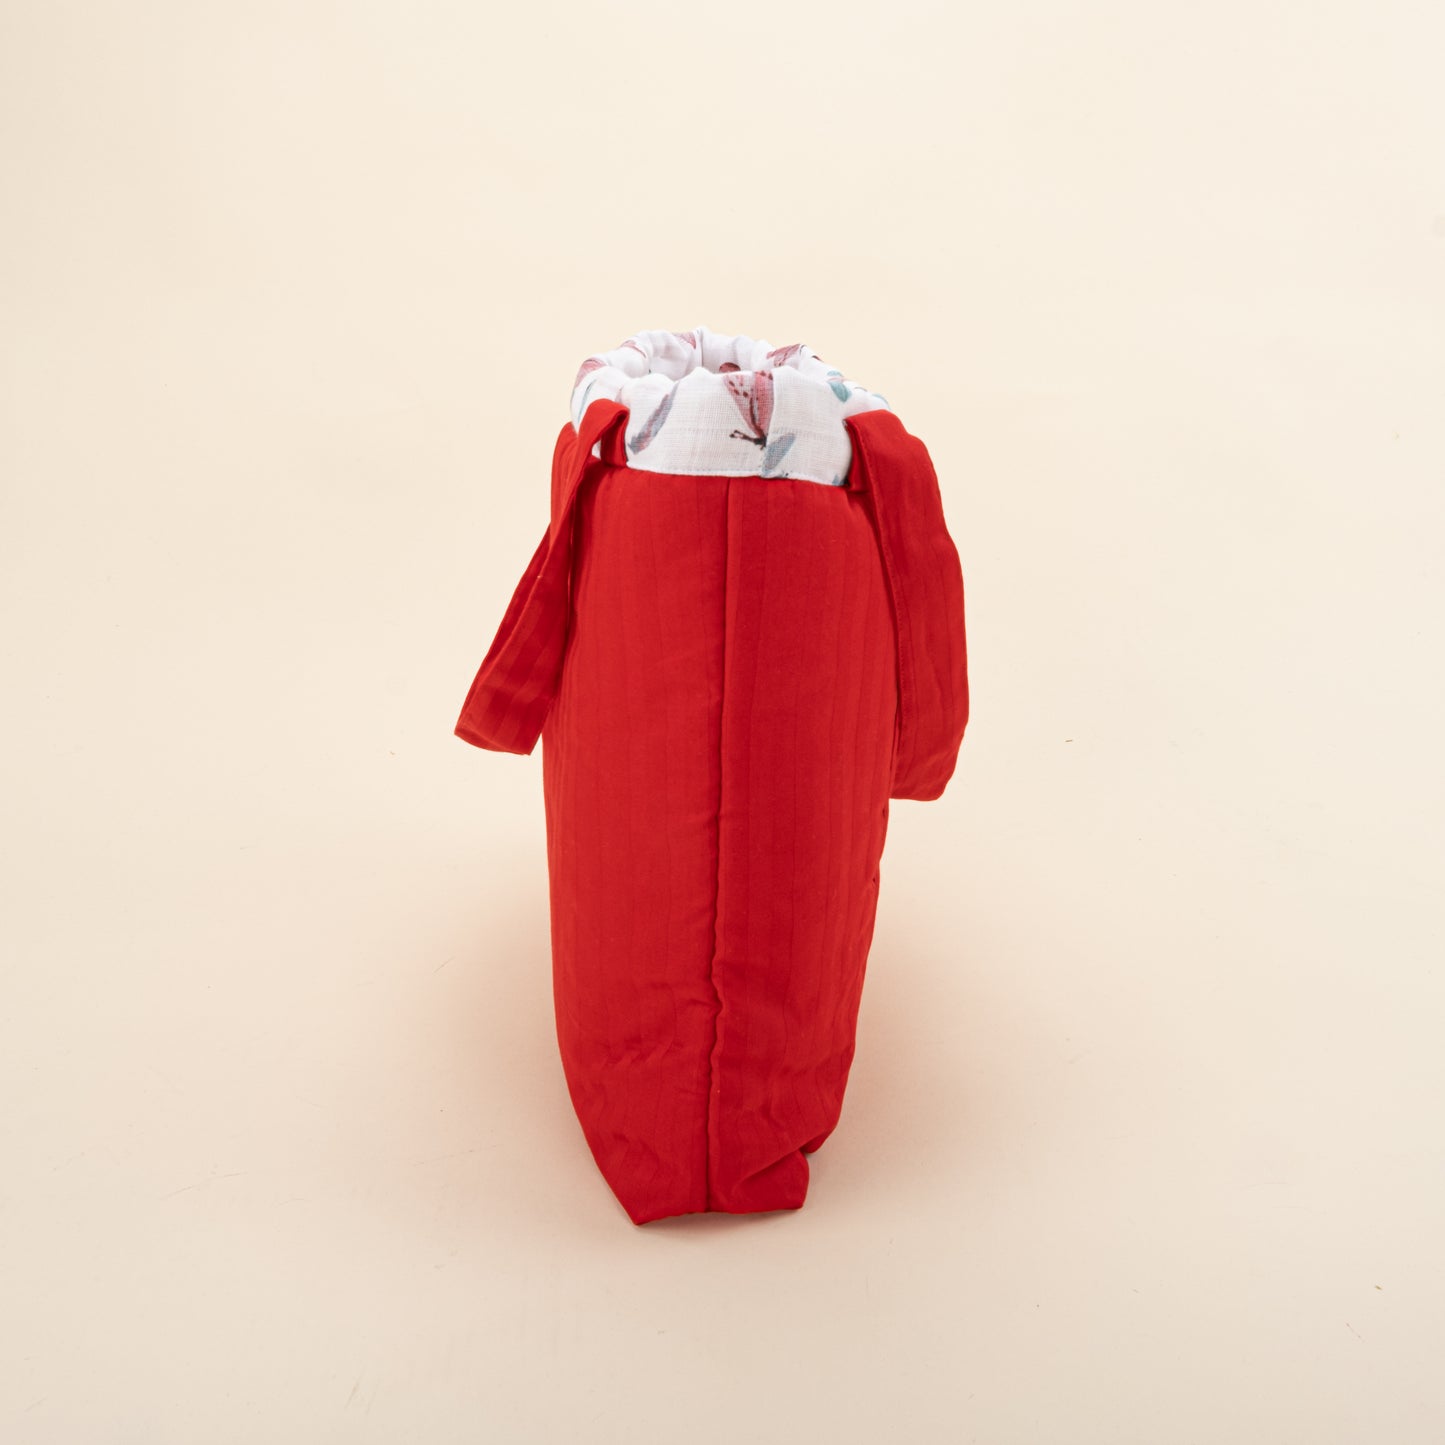 Baby Care Bag - Red Satin - Butterfly